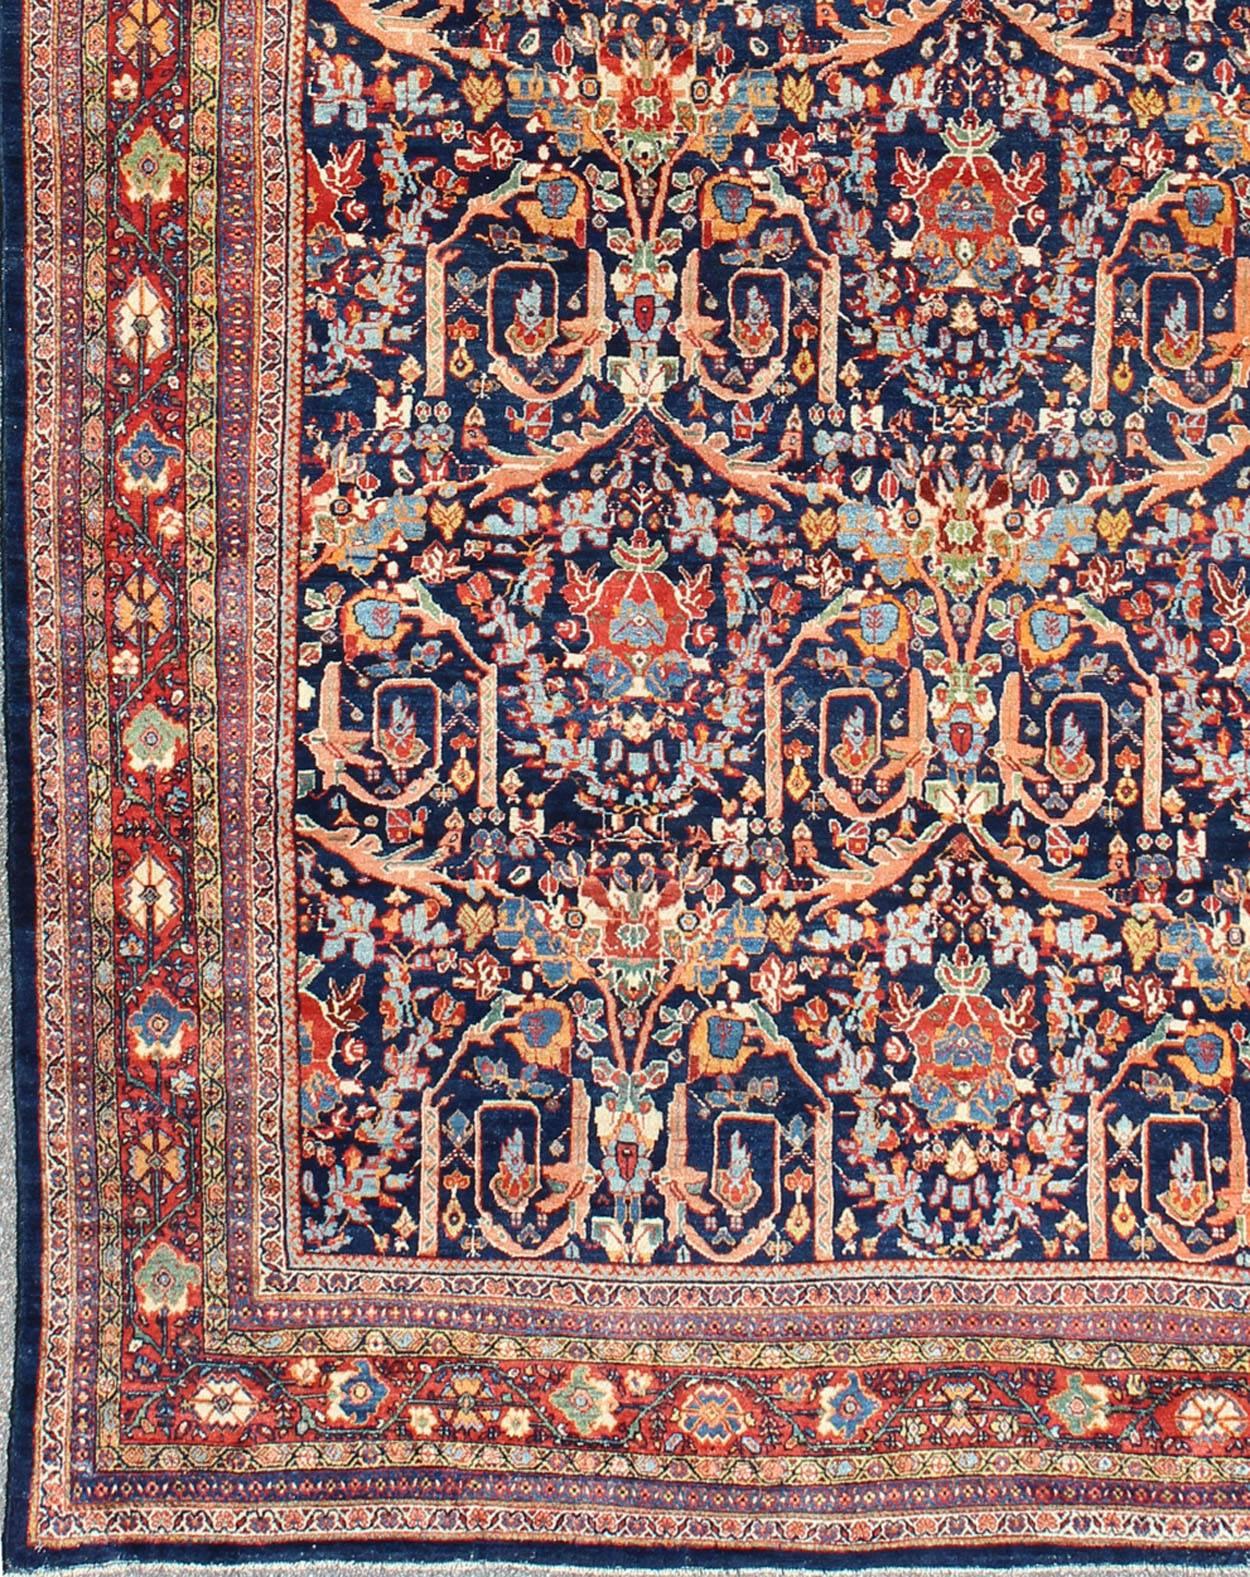 Large Antique Persian Sultanabad Rug in Blue Background and variety of beautiful Colors. rug 17-0105, country of origin / type: Iran / Sultanabad, circa 1910. 

Measures: 13'7 x 20'9.

Set of navy background, this colorful antique Persian large